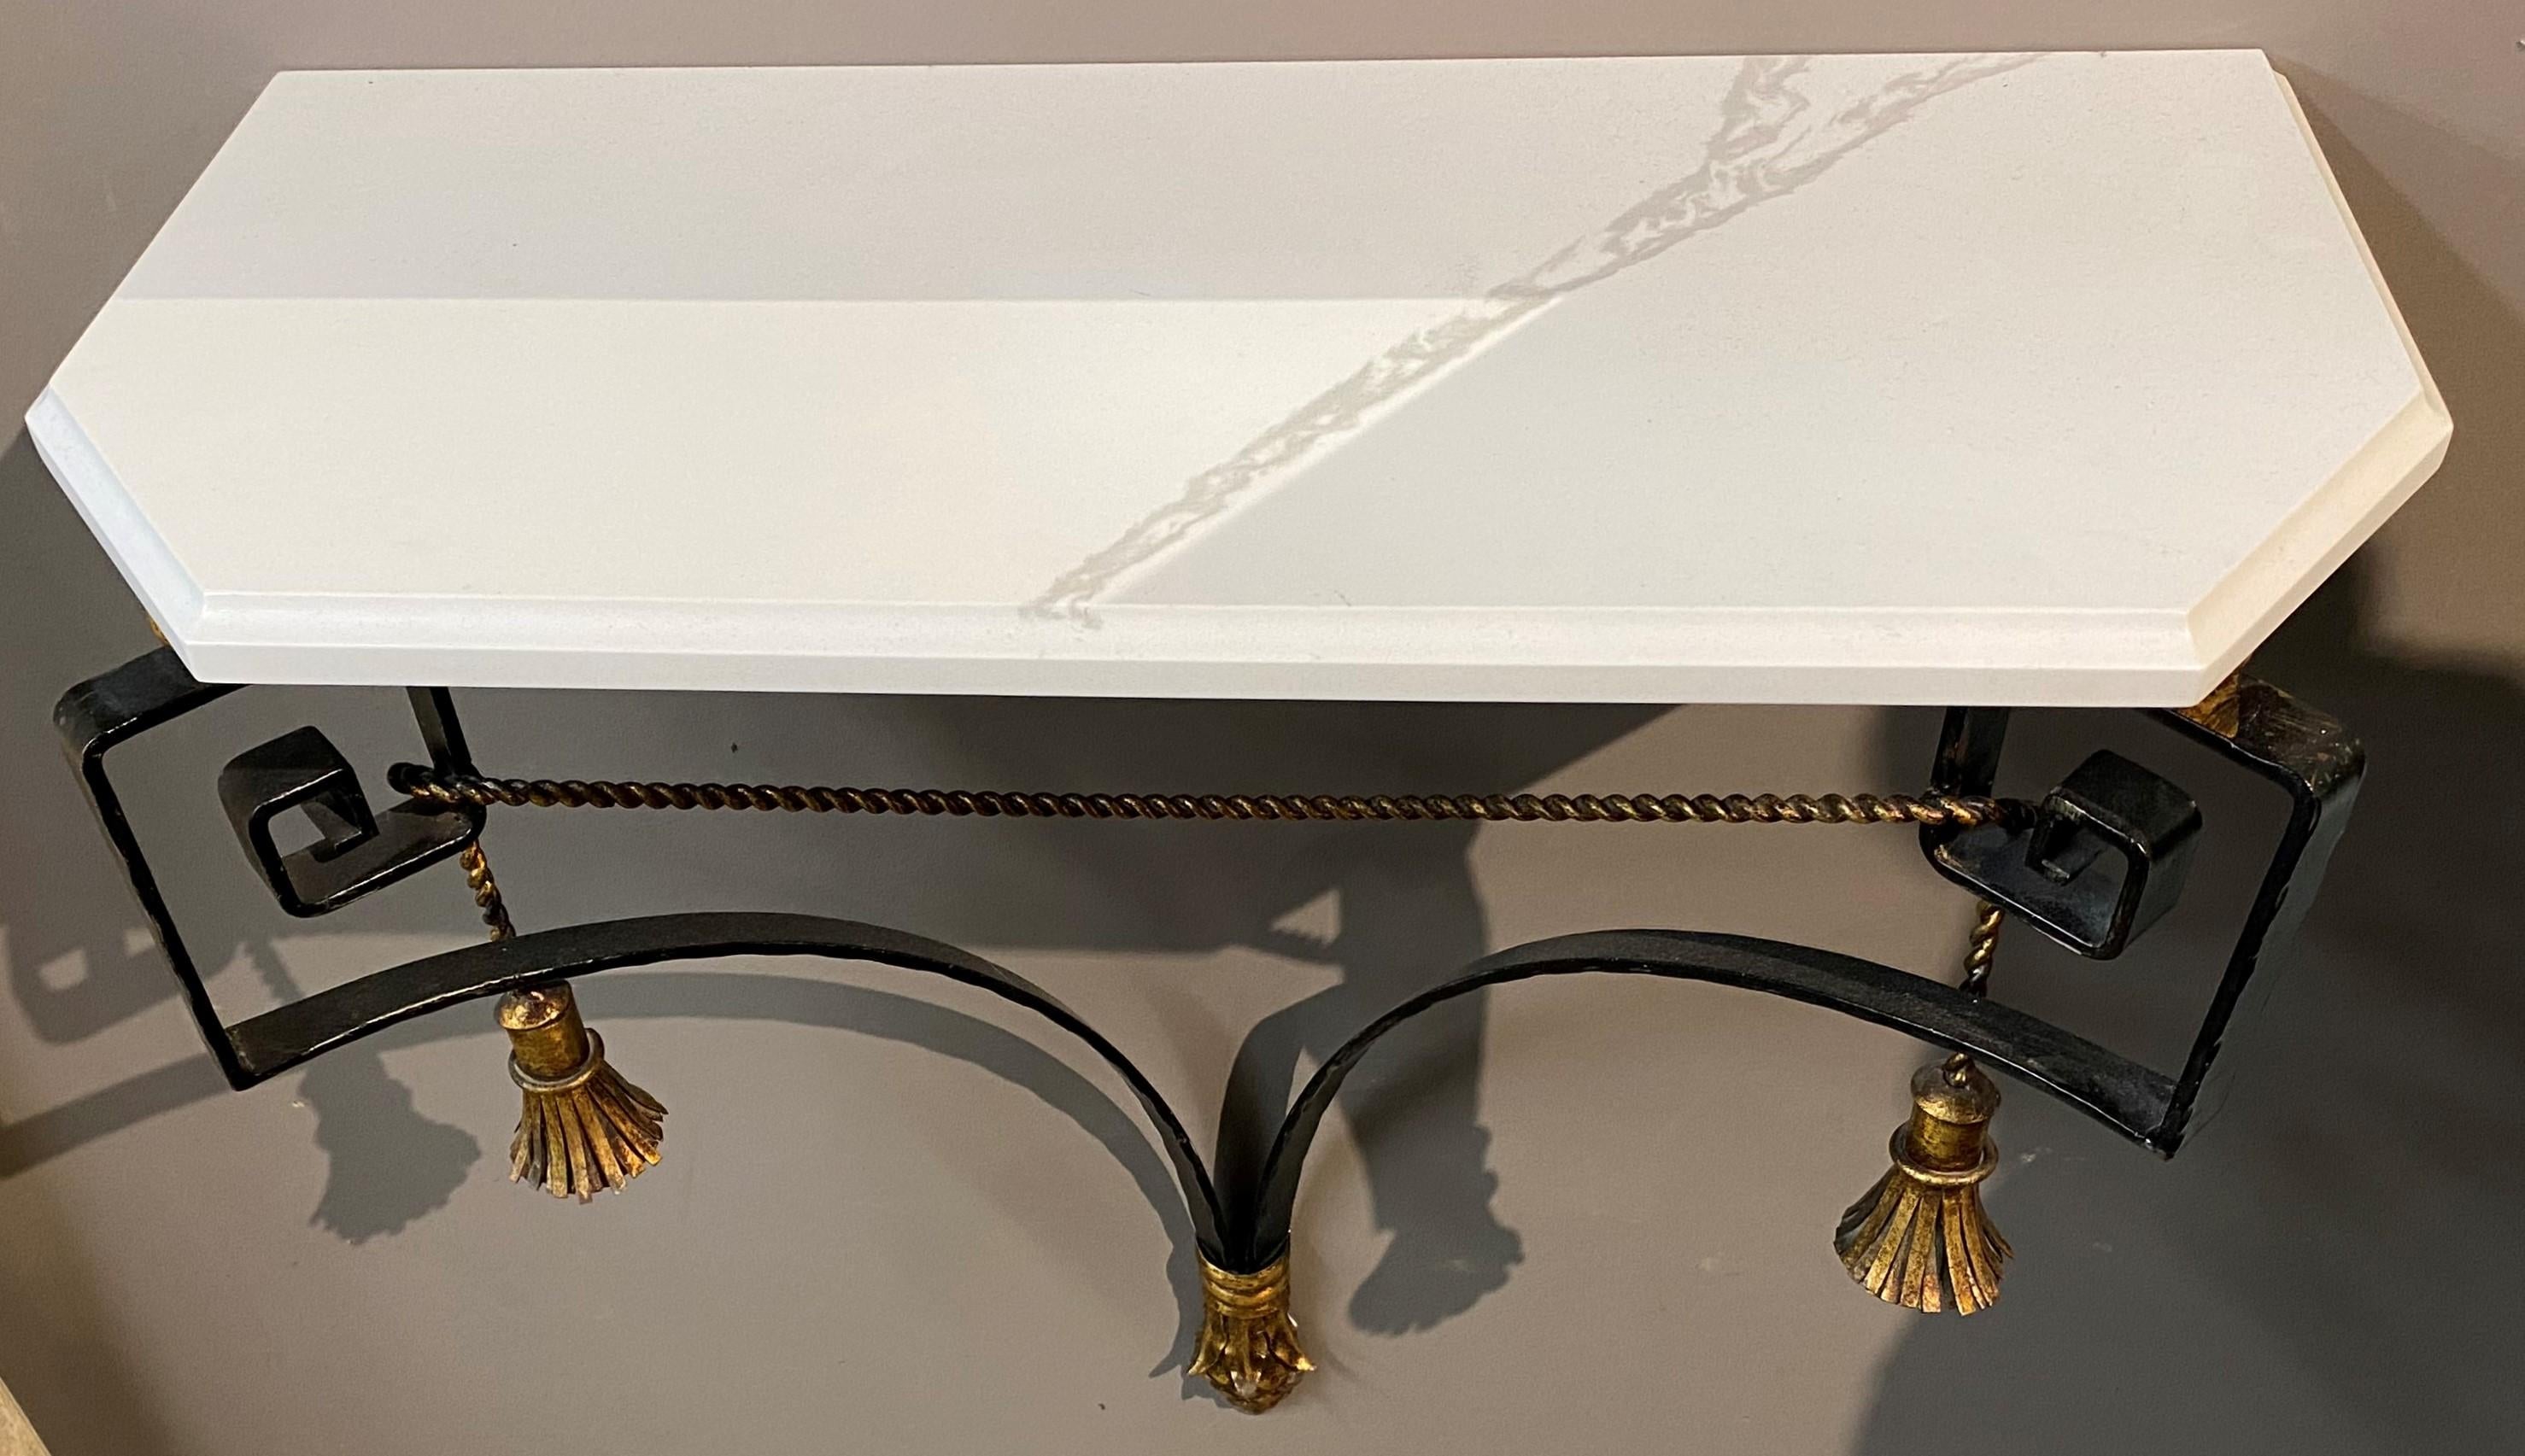 20th Century Palladio Furniture Italian Console with Gilded Tassels & Mirror with Urn Crest